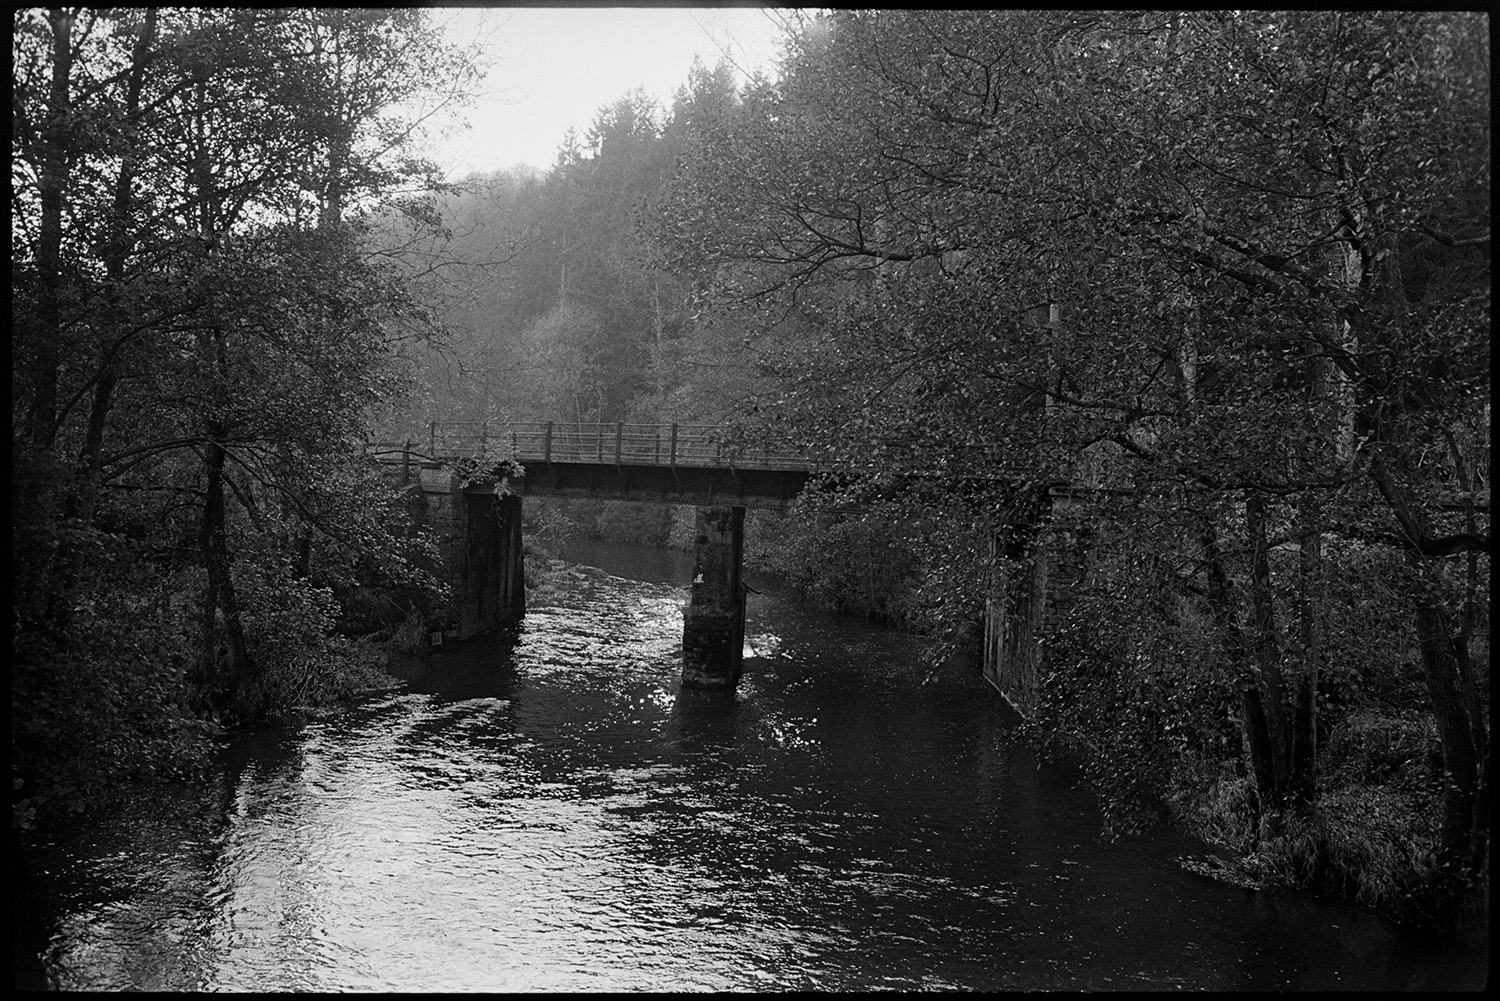 Railway bridge over river, men repairing bridge, walkway.
[A railway bridge, with stone pillars and metal railings, over the River Taw near Eggesford. The wooded slopes of the Taw valley are in the background.]